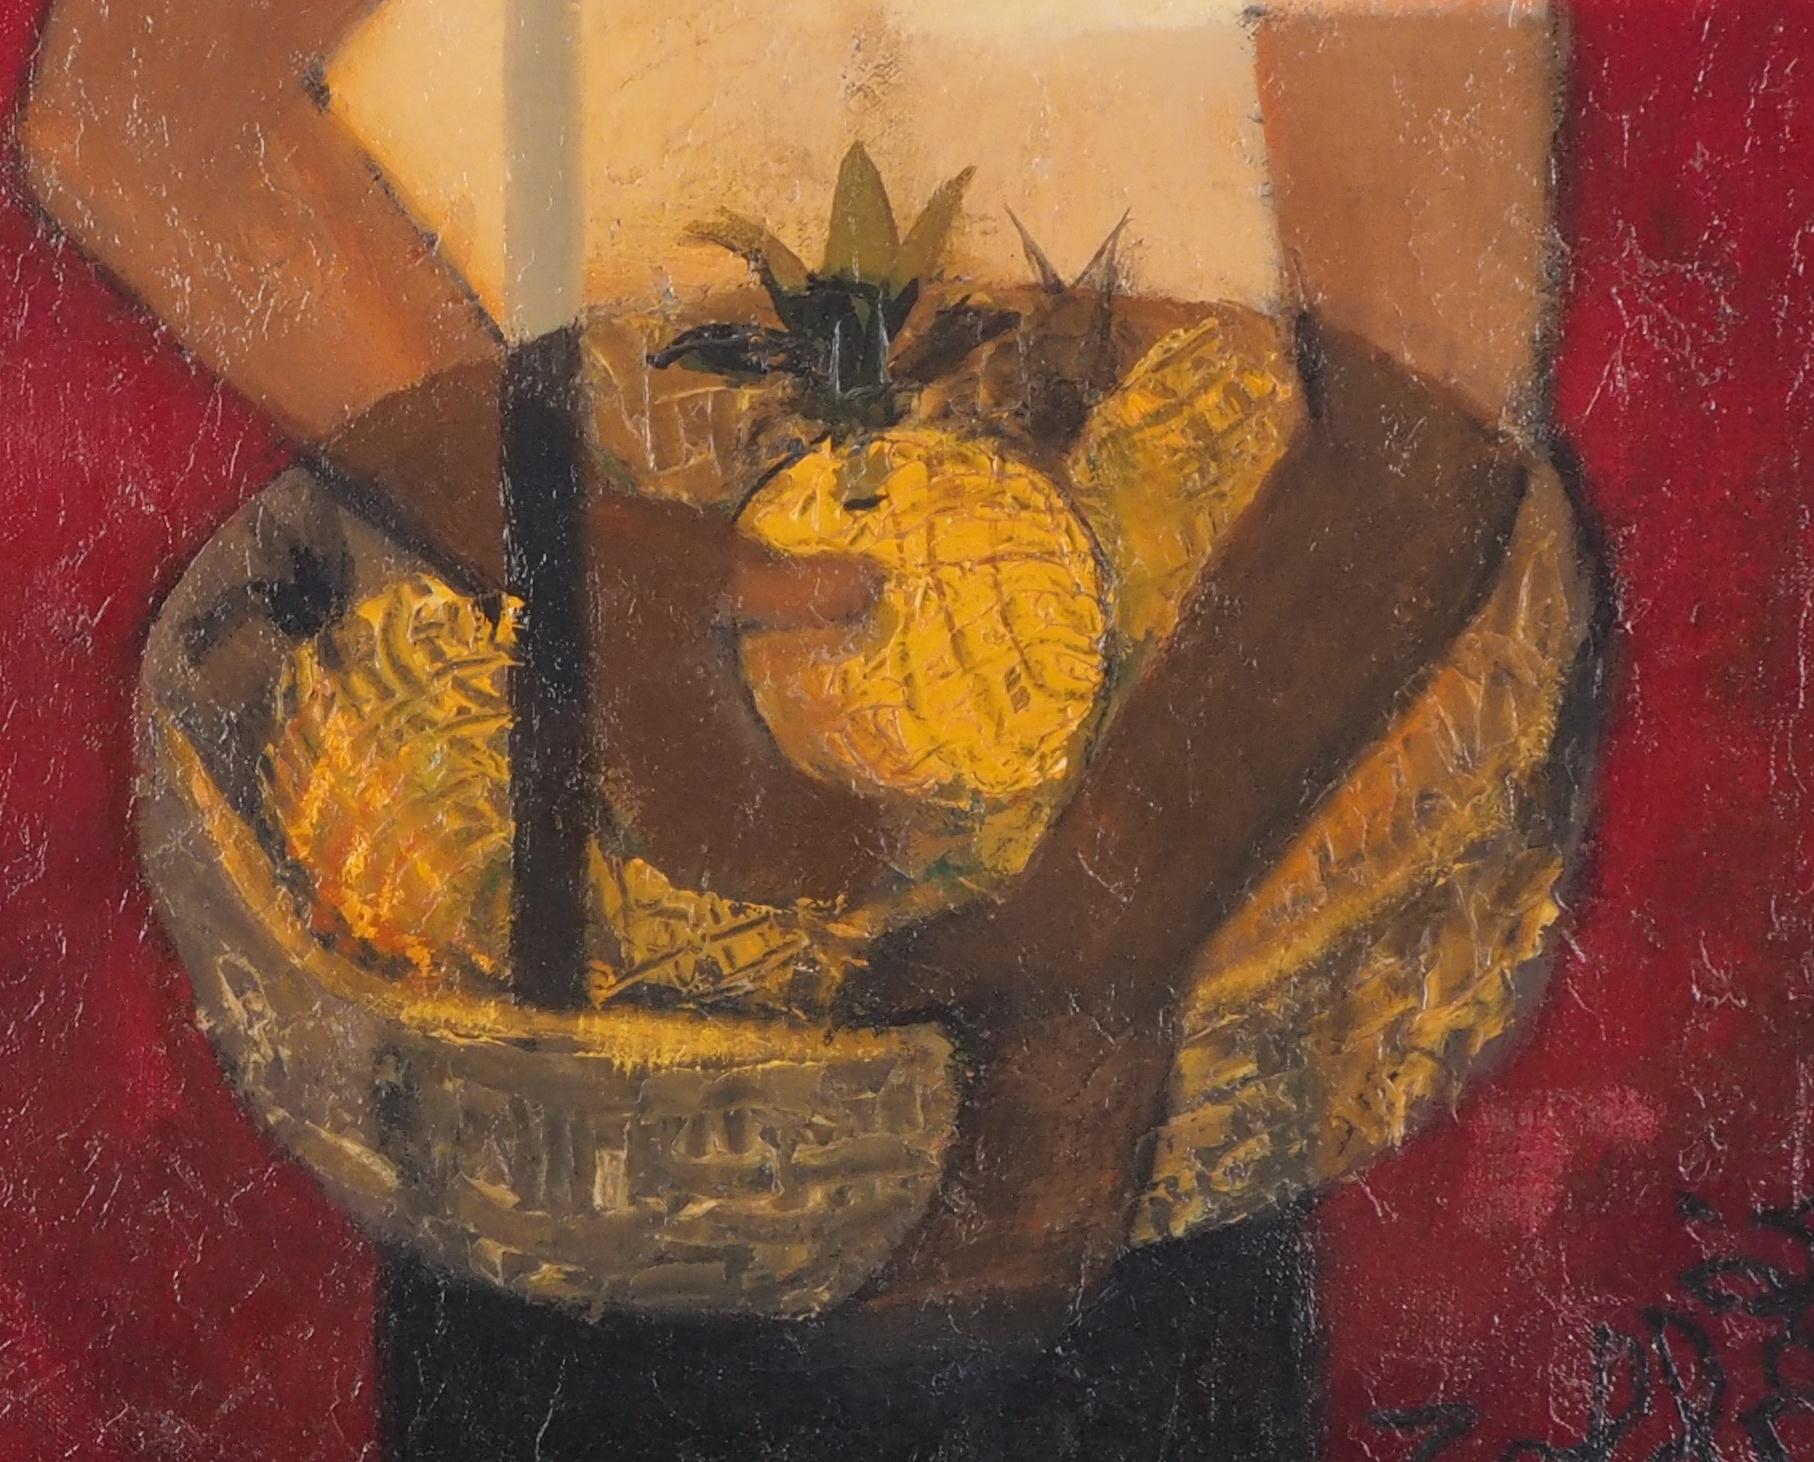 Louis Toffoli (1907-1999)
Brazil : Man with Pineapple

Original oil painting
Signed bottom right
On canvas 55 x 38 cm (c. 22 x 15 inch)
Presented in a golden wood frame 70 x 51 cm (c. 28 x 20 inch) 
Titled on the back

Excellent condition, light